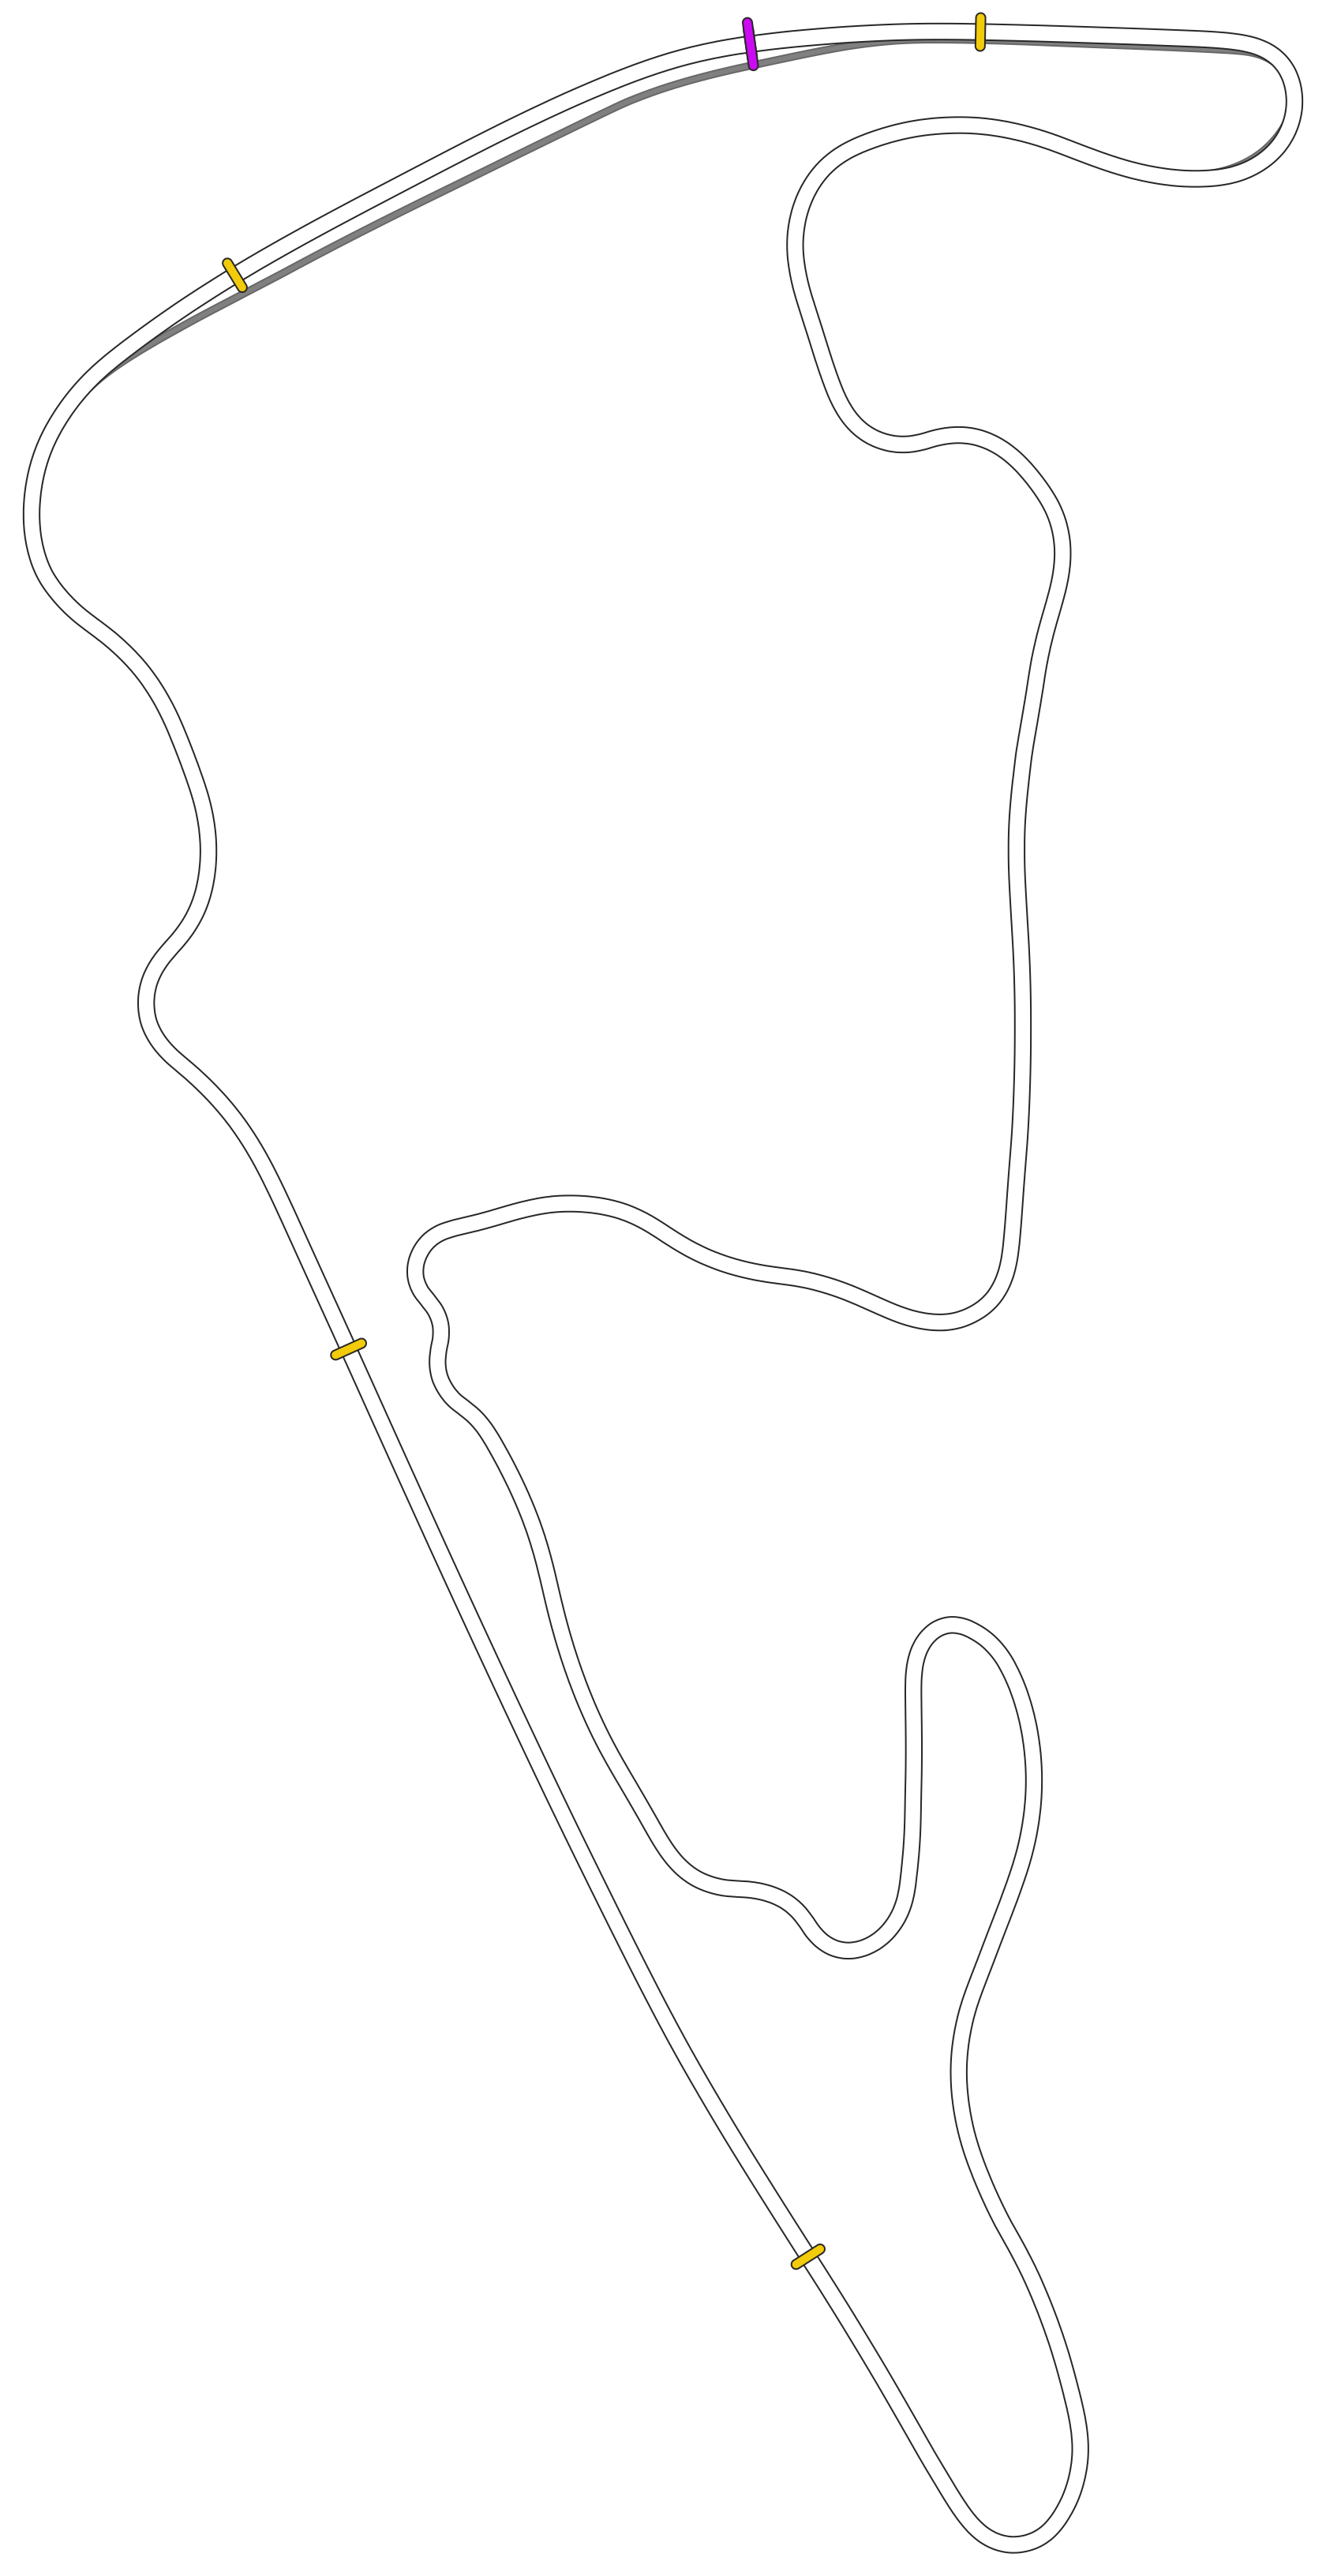 grand east course